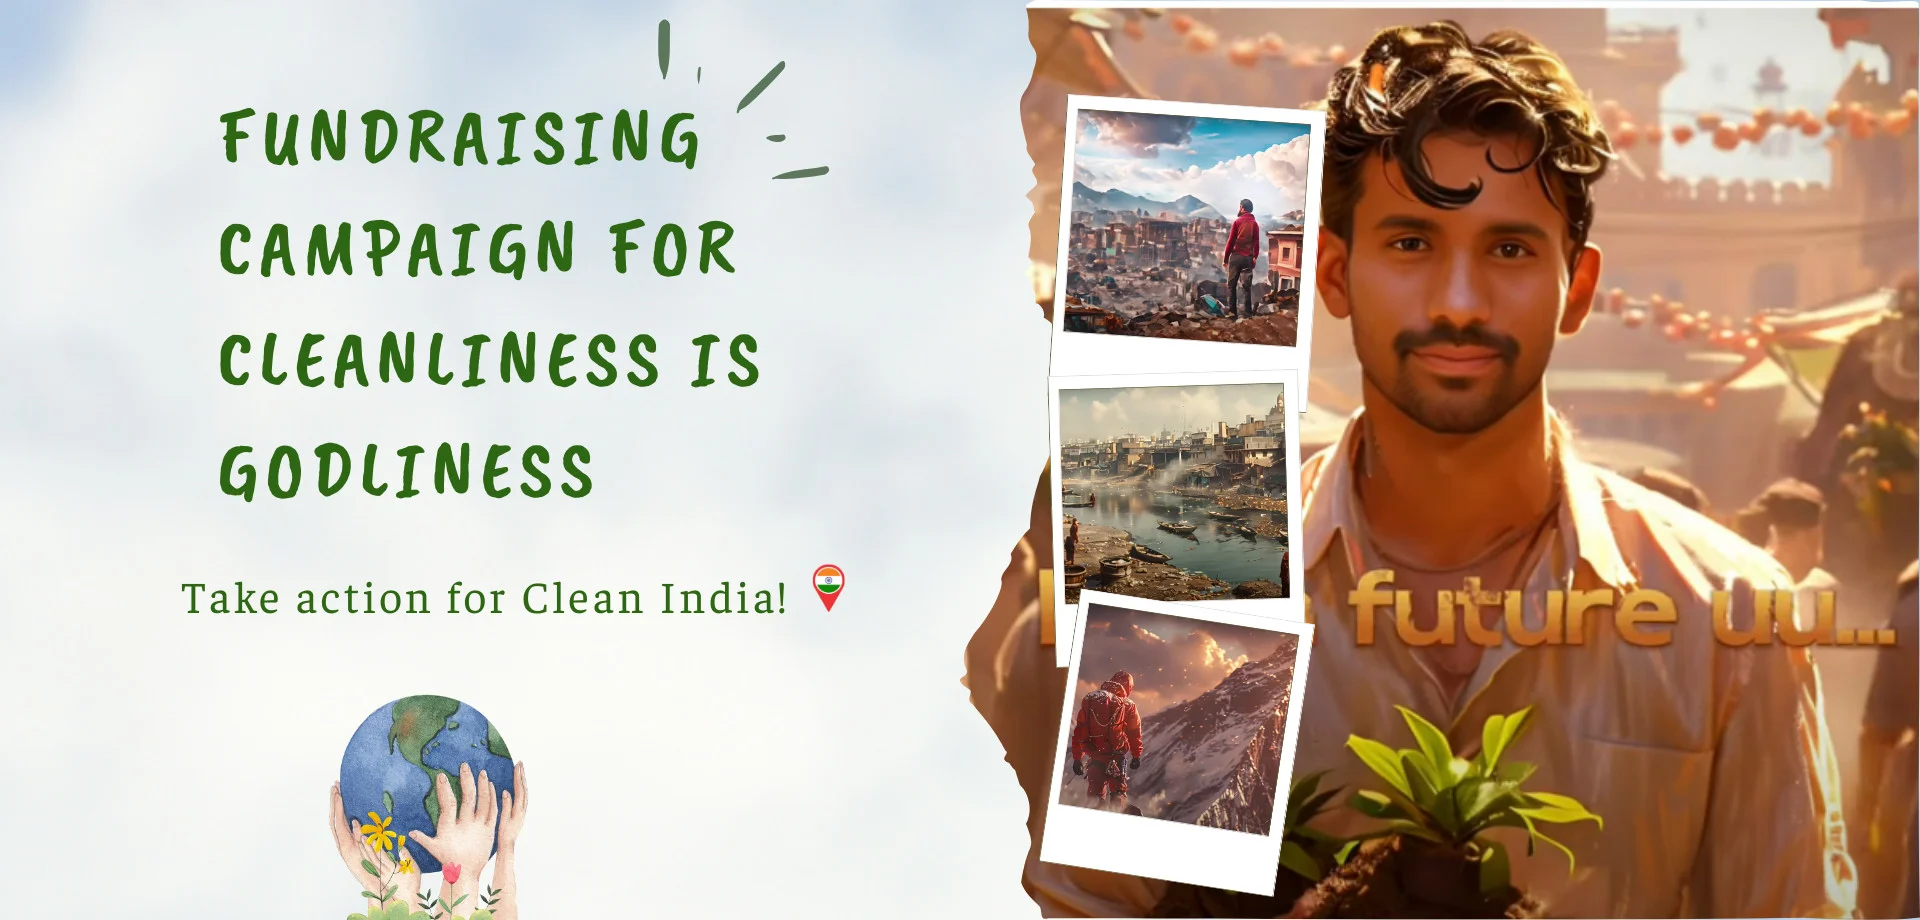 Fundraising for a cleaner India